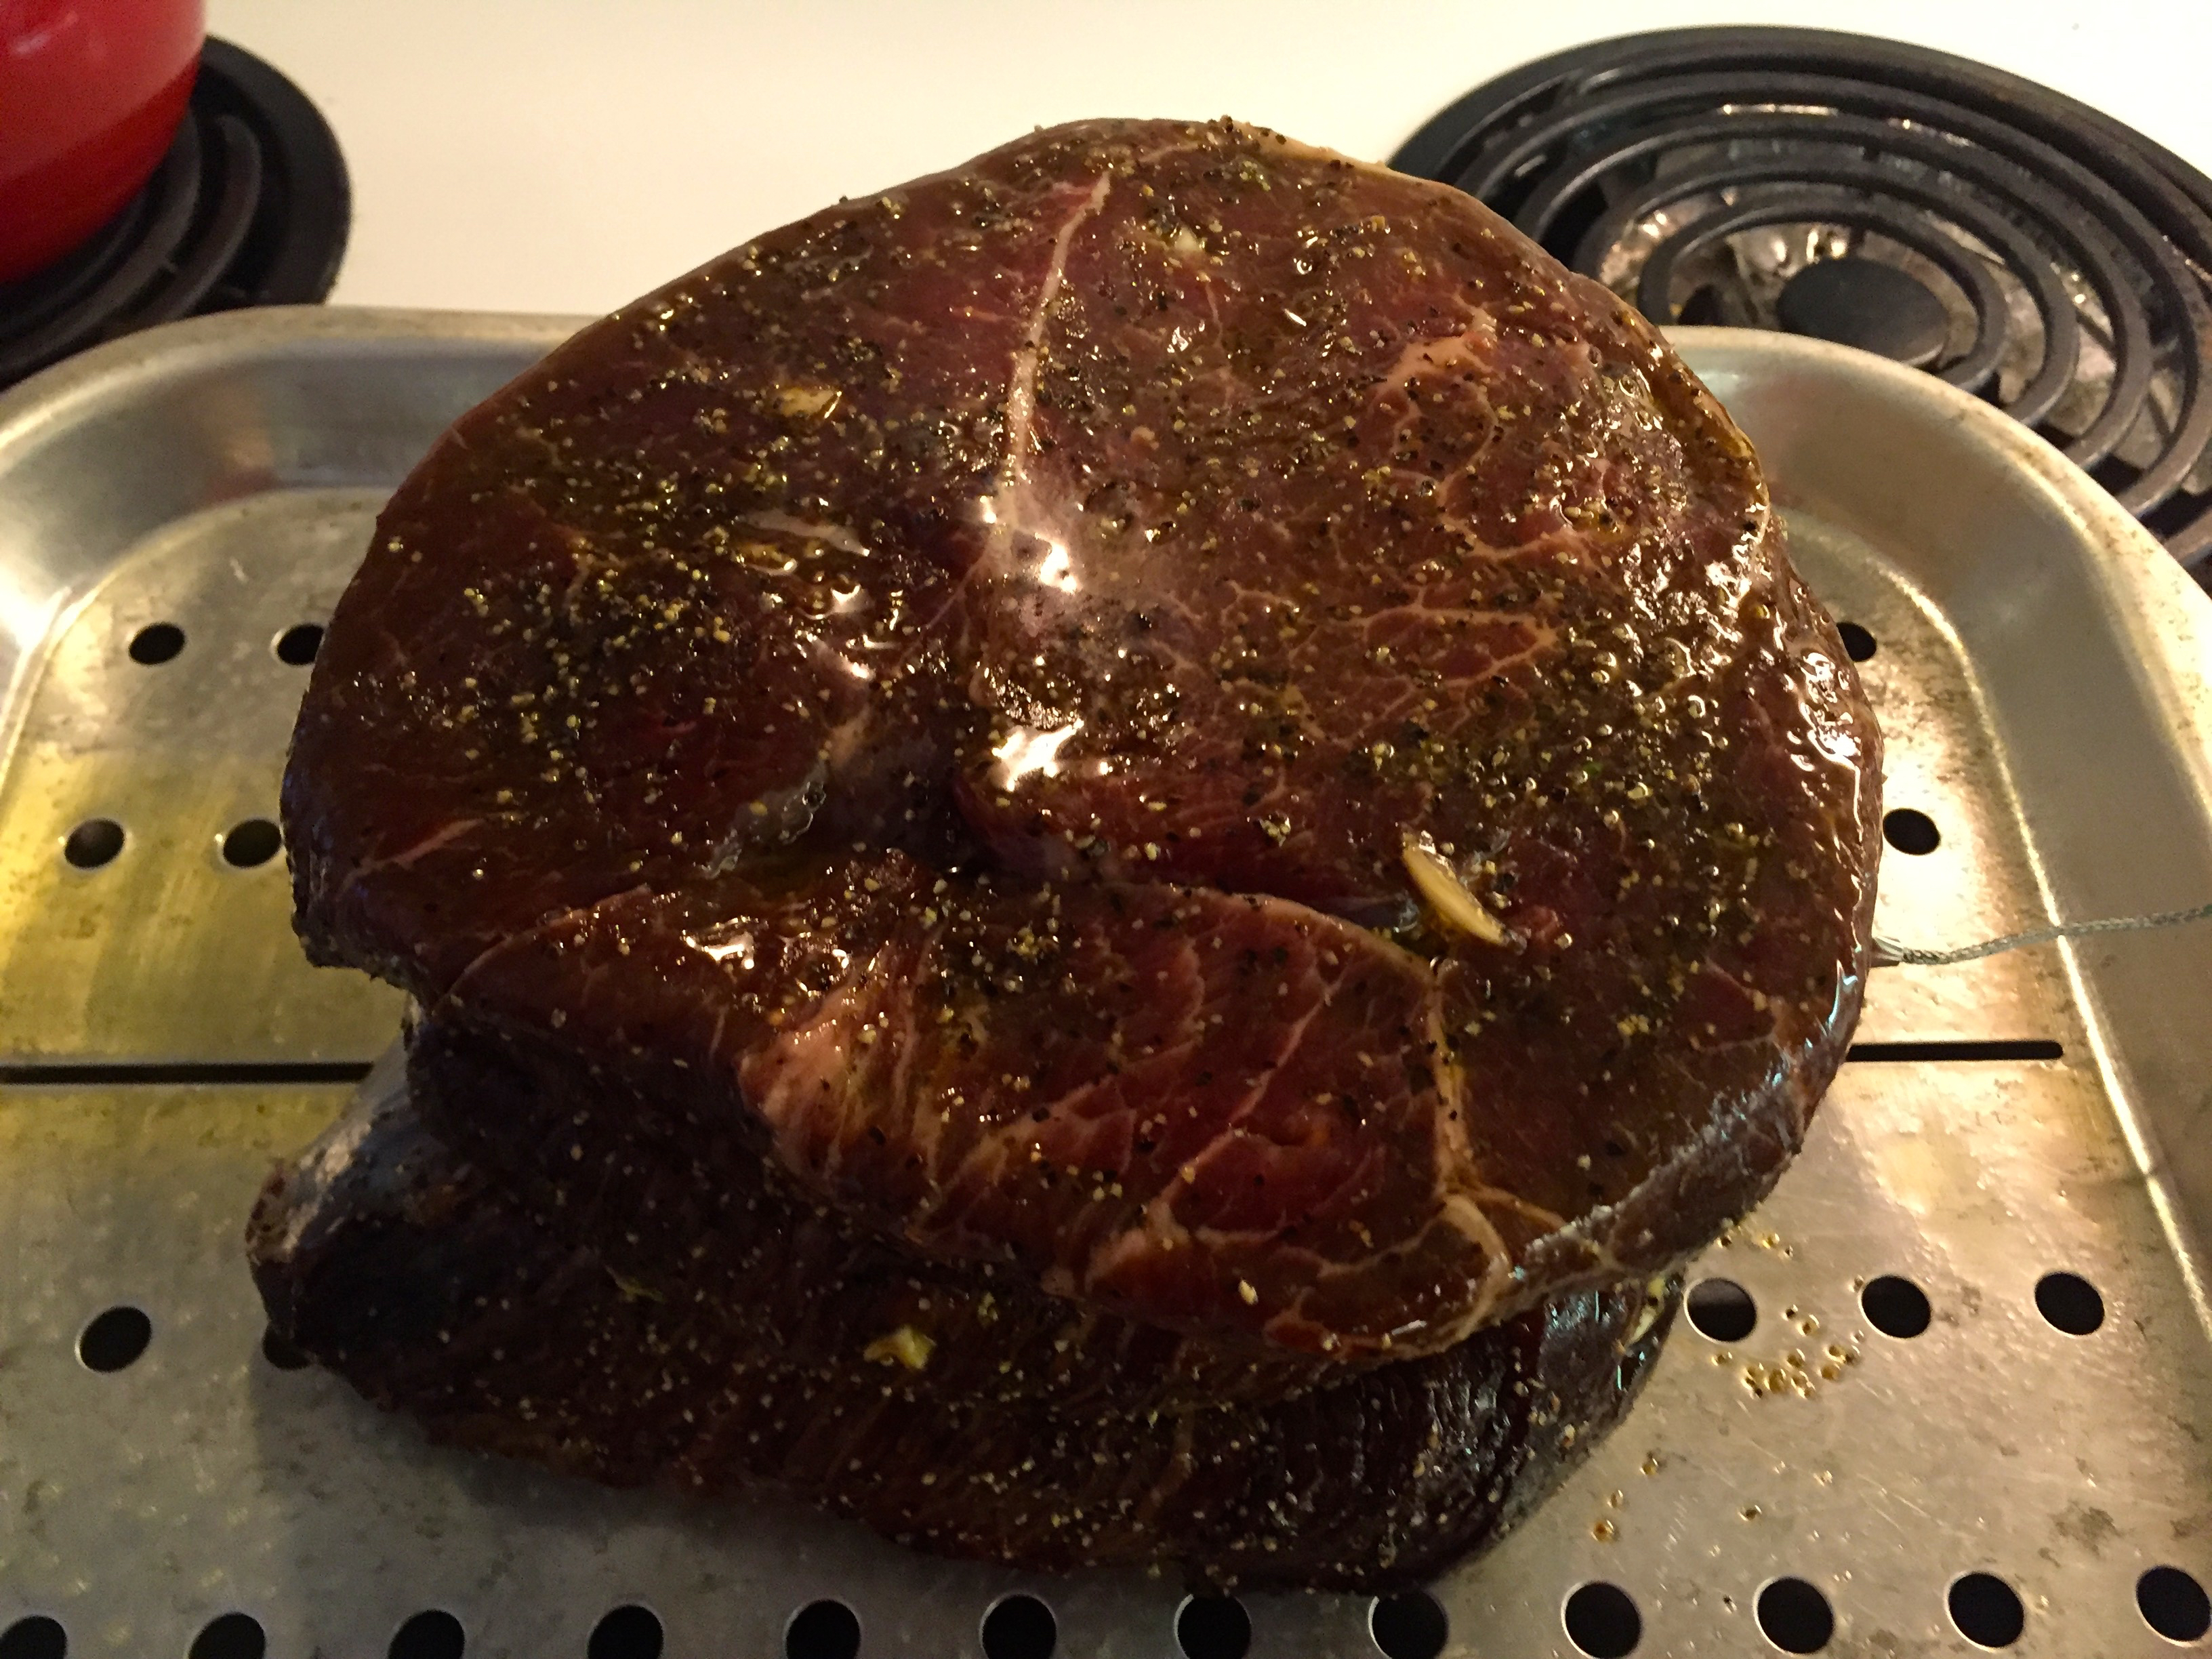 http://new.chefvedam.com/wp-content/uploads/2015/12/Spiced-Top-Sirloin-Rib-Roast-2-ready-for-the-oven.jpg